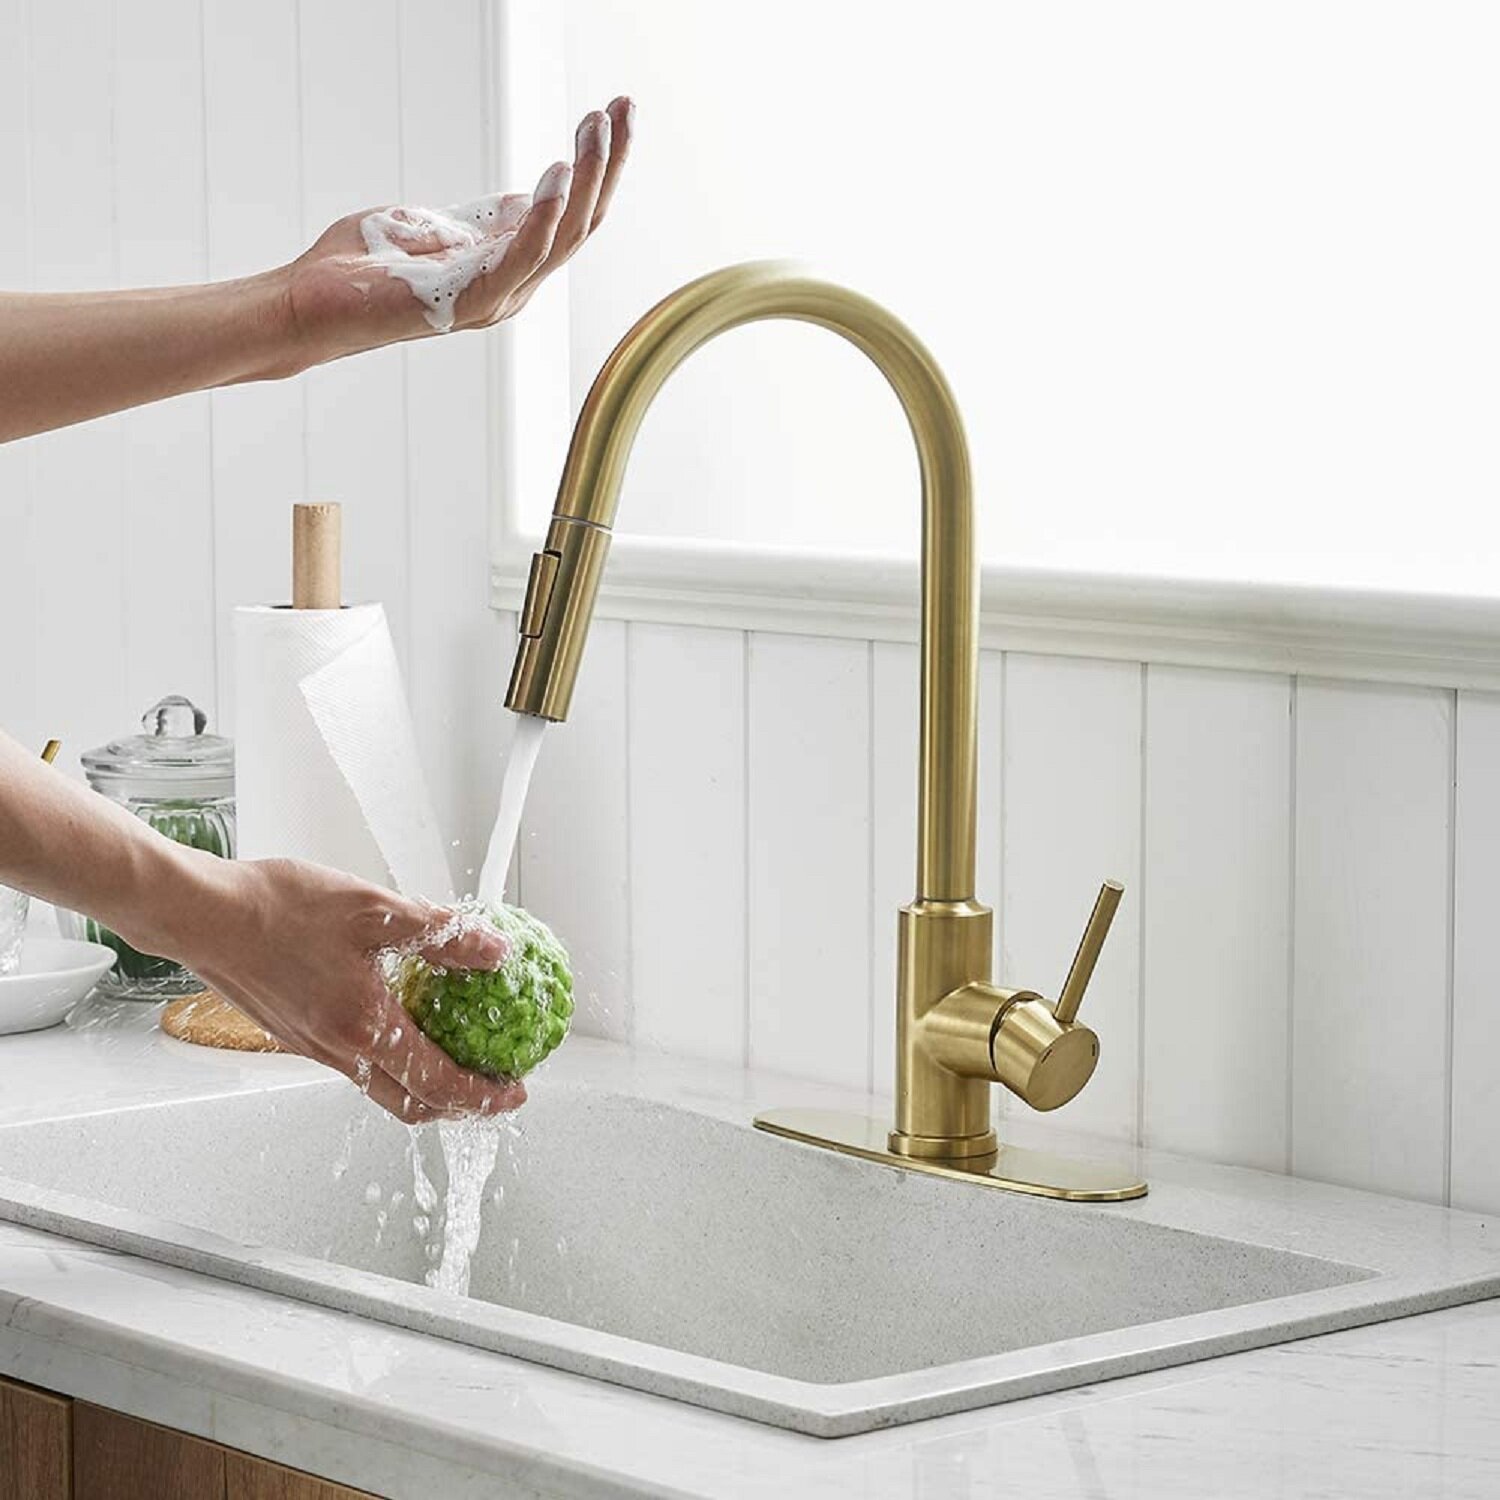 Kitchen Faucet Brushed Chrome Sink Tap Single Handle Pull Down Sprayer Sweep US 